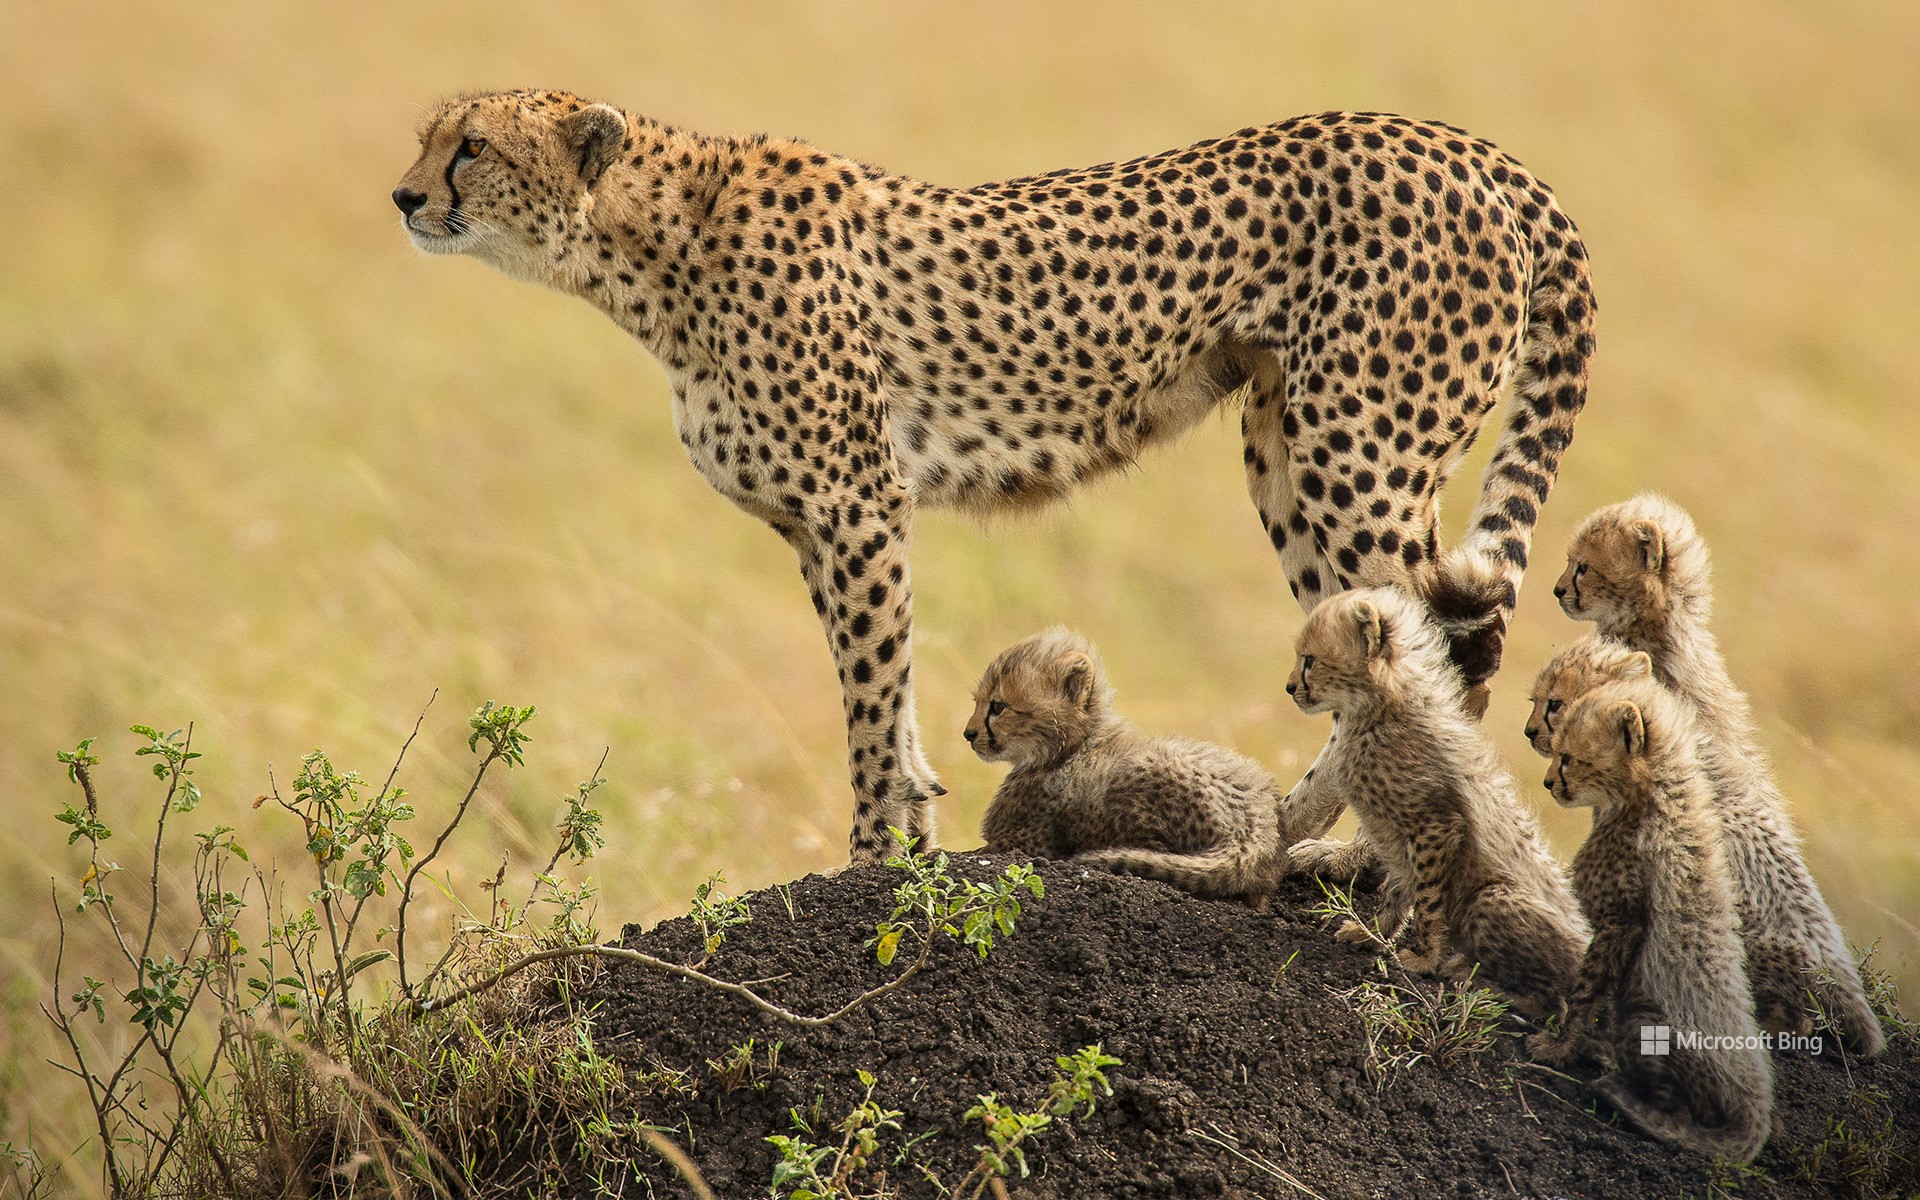 A mother cheetah and her cubs in the Masai Mara National Reserve, Kenya